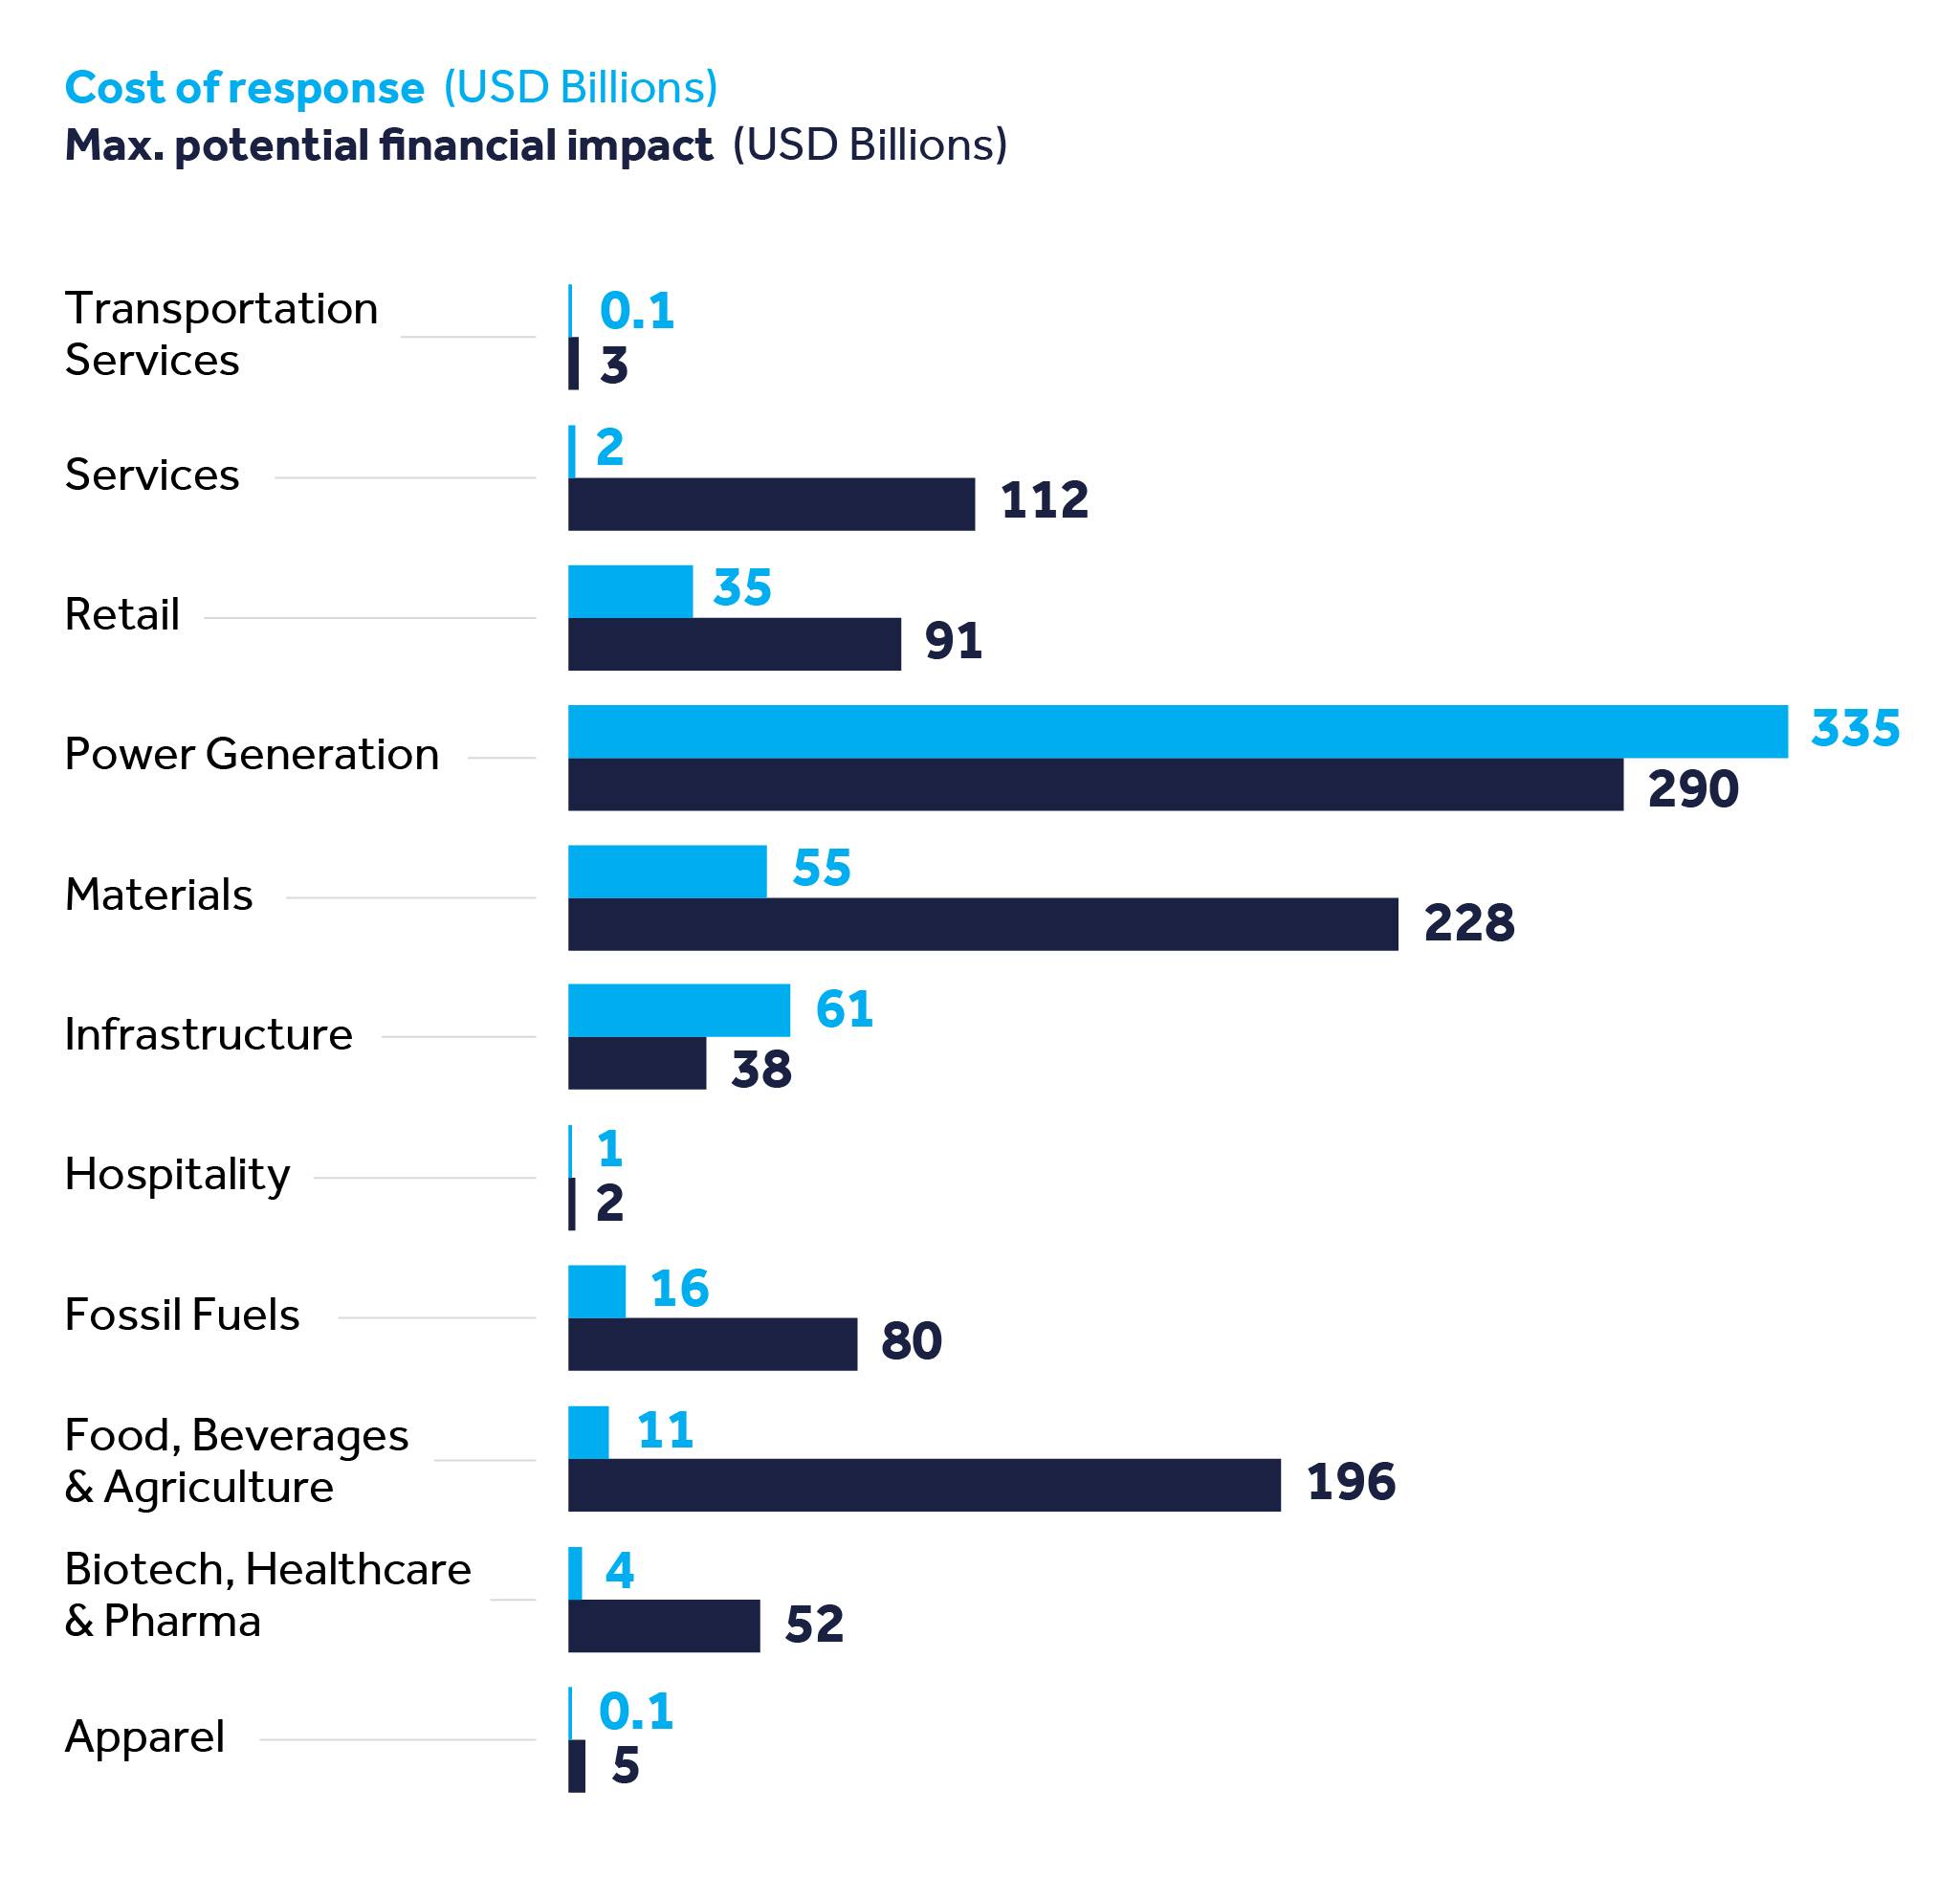 Bar chart depicting cost of response to water-related risks versus maximum potential financial impact of inaction in USD billions